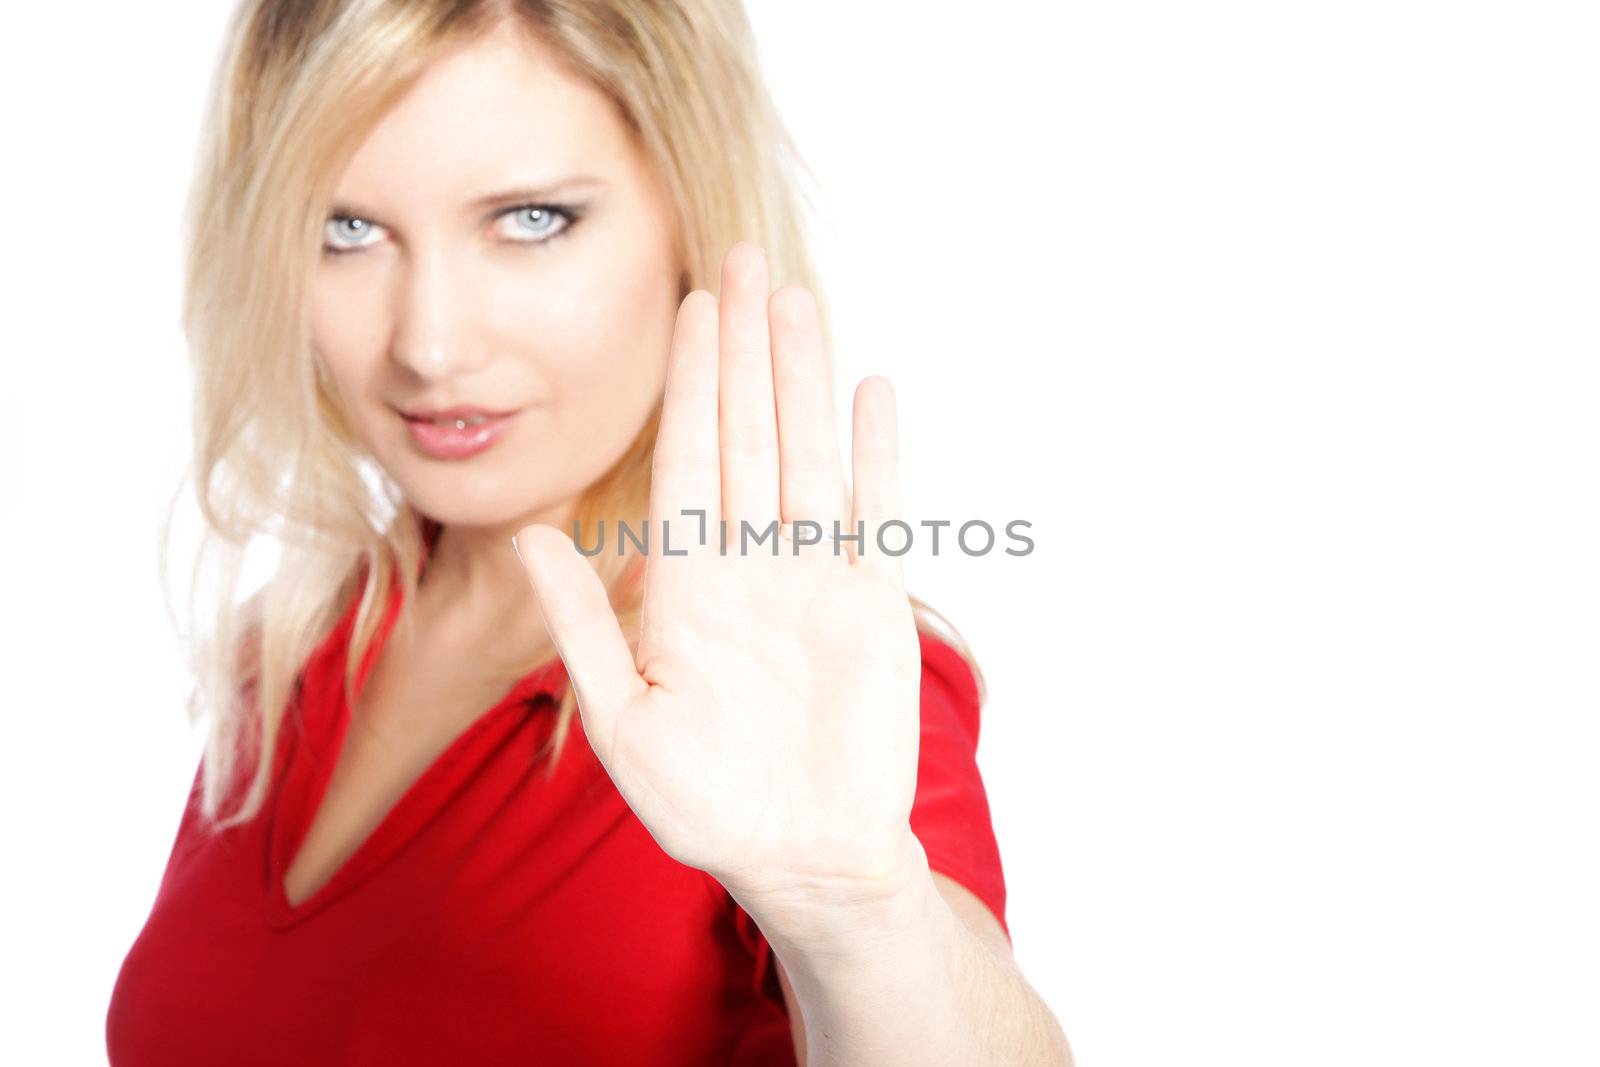 Attractive young woman making a cease and desist gesture with her hand holding her palm up to the camera